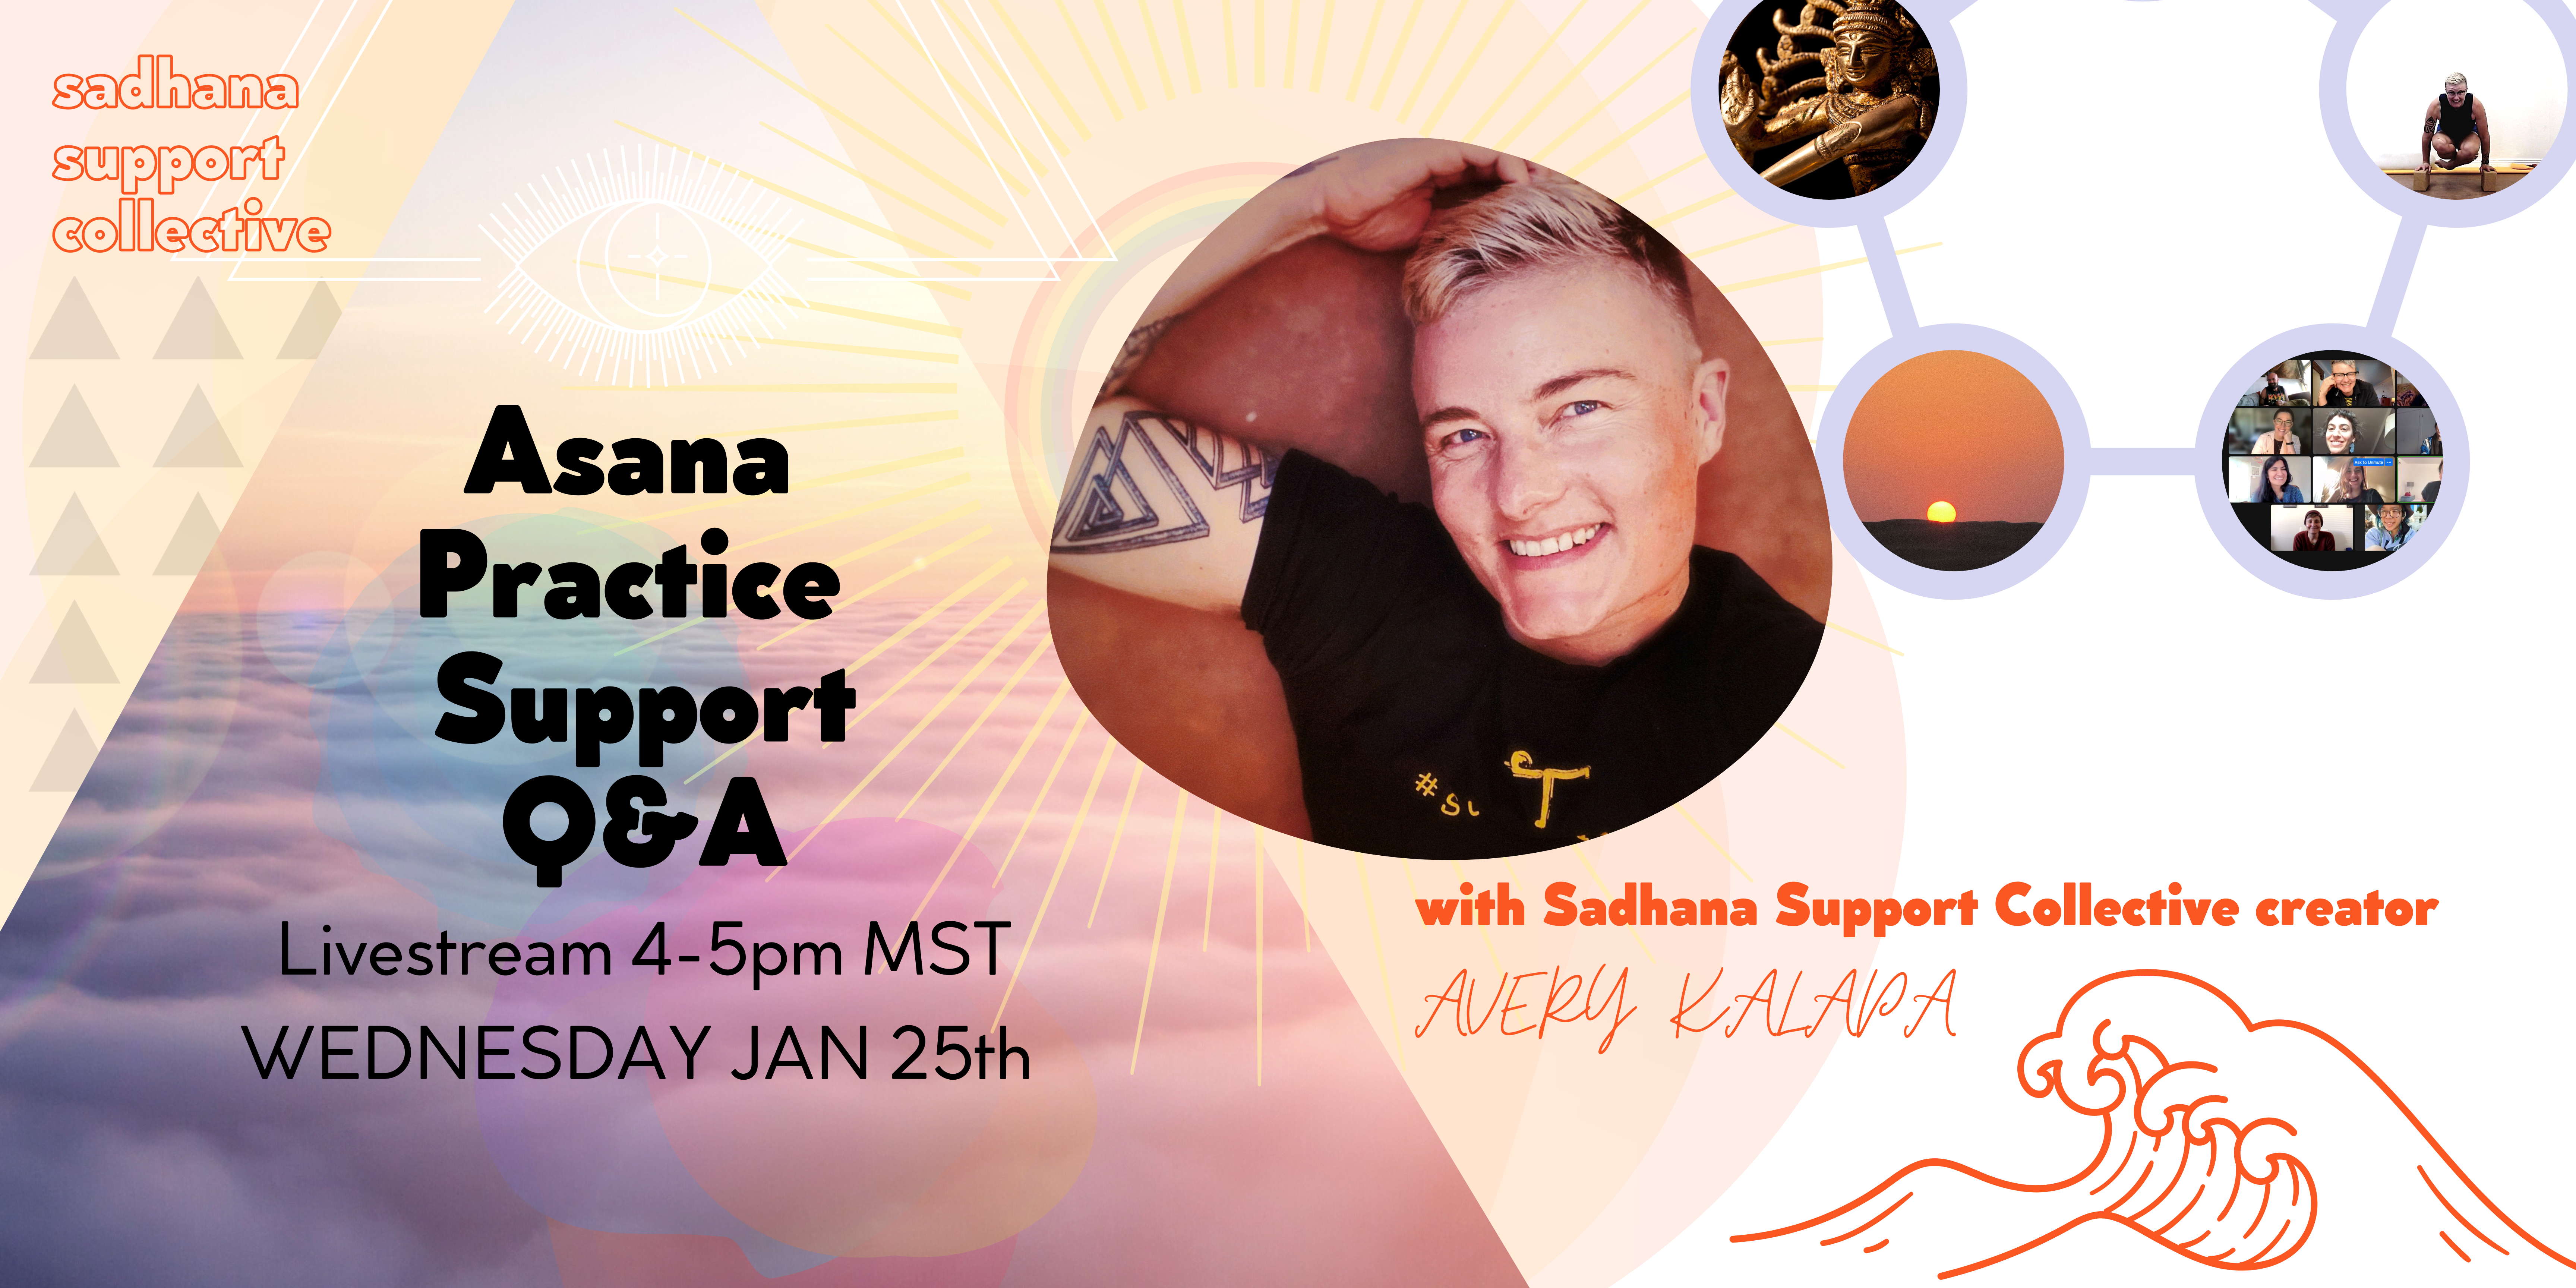 Free Yoga workshop with queer trans Iyengar Yoga teacher Avery Kalapa: Reclaim your agency and peace!